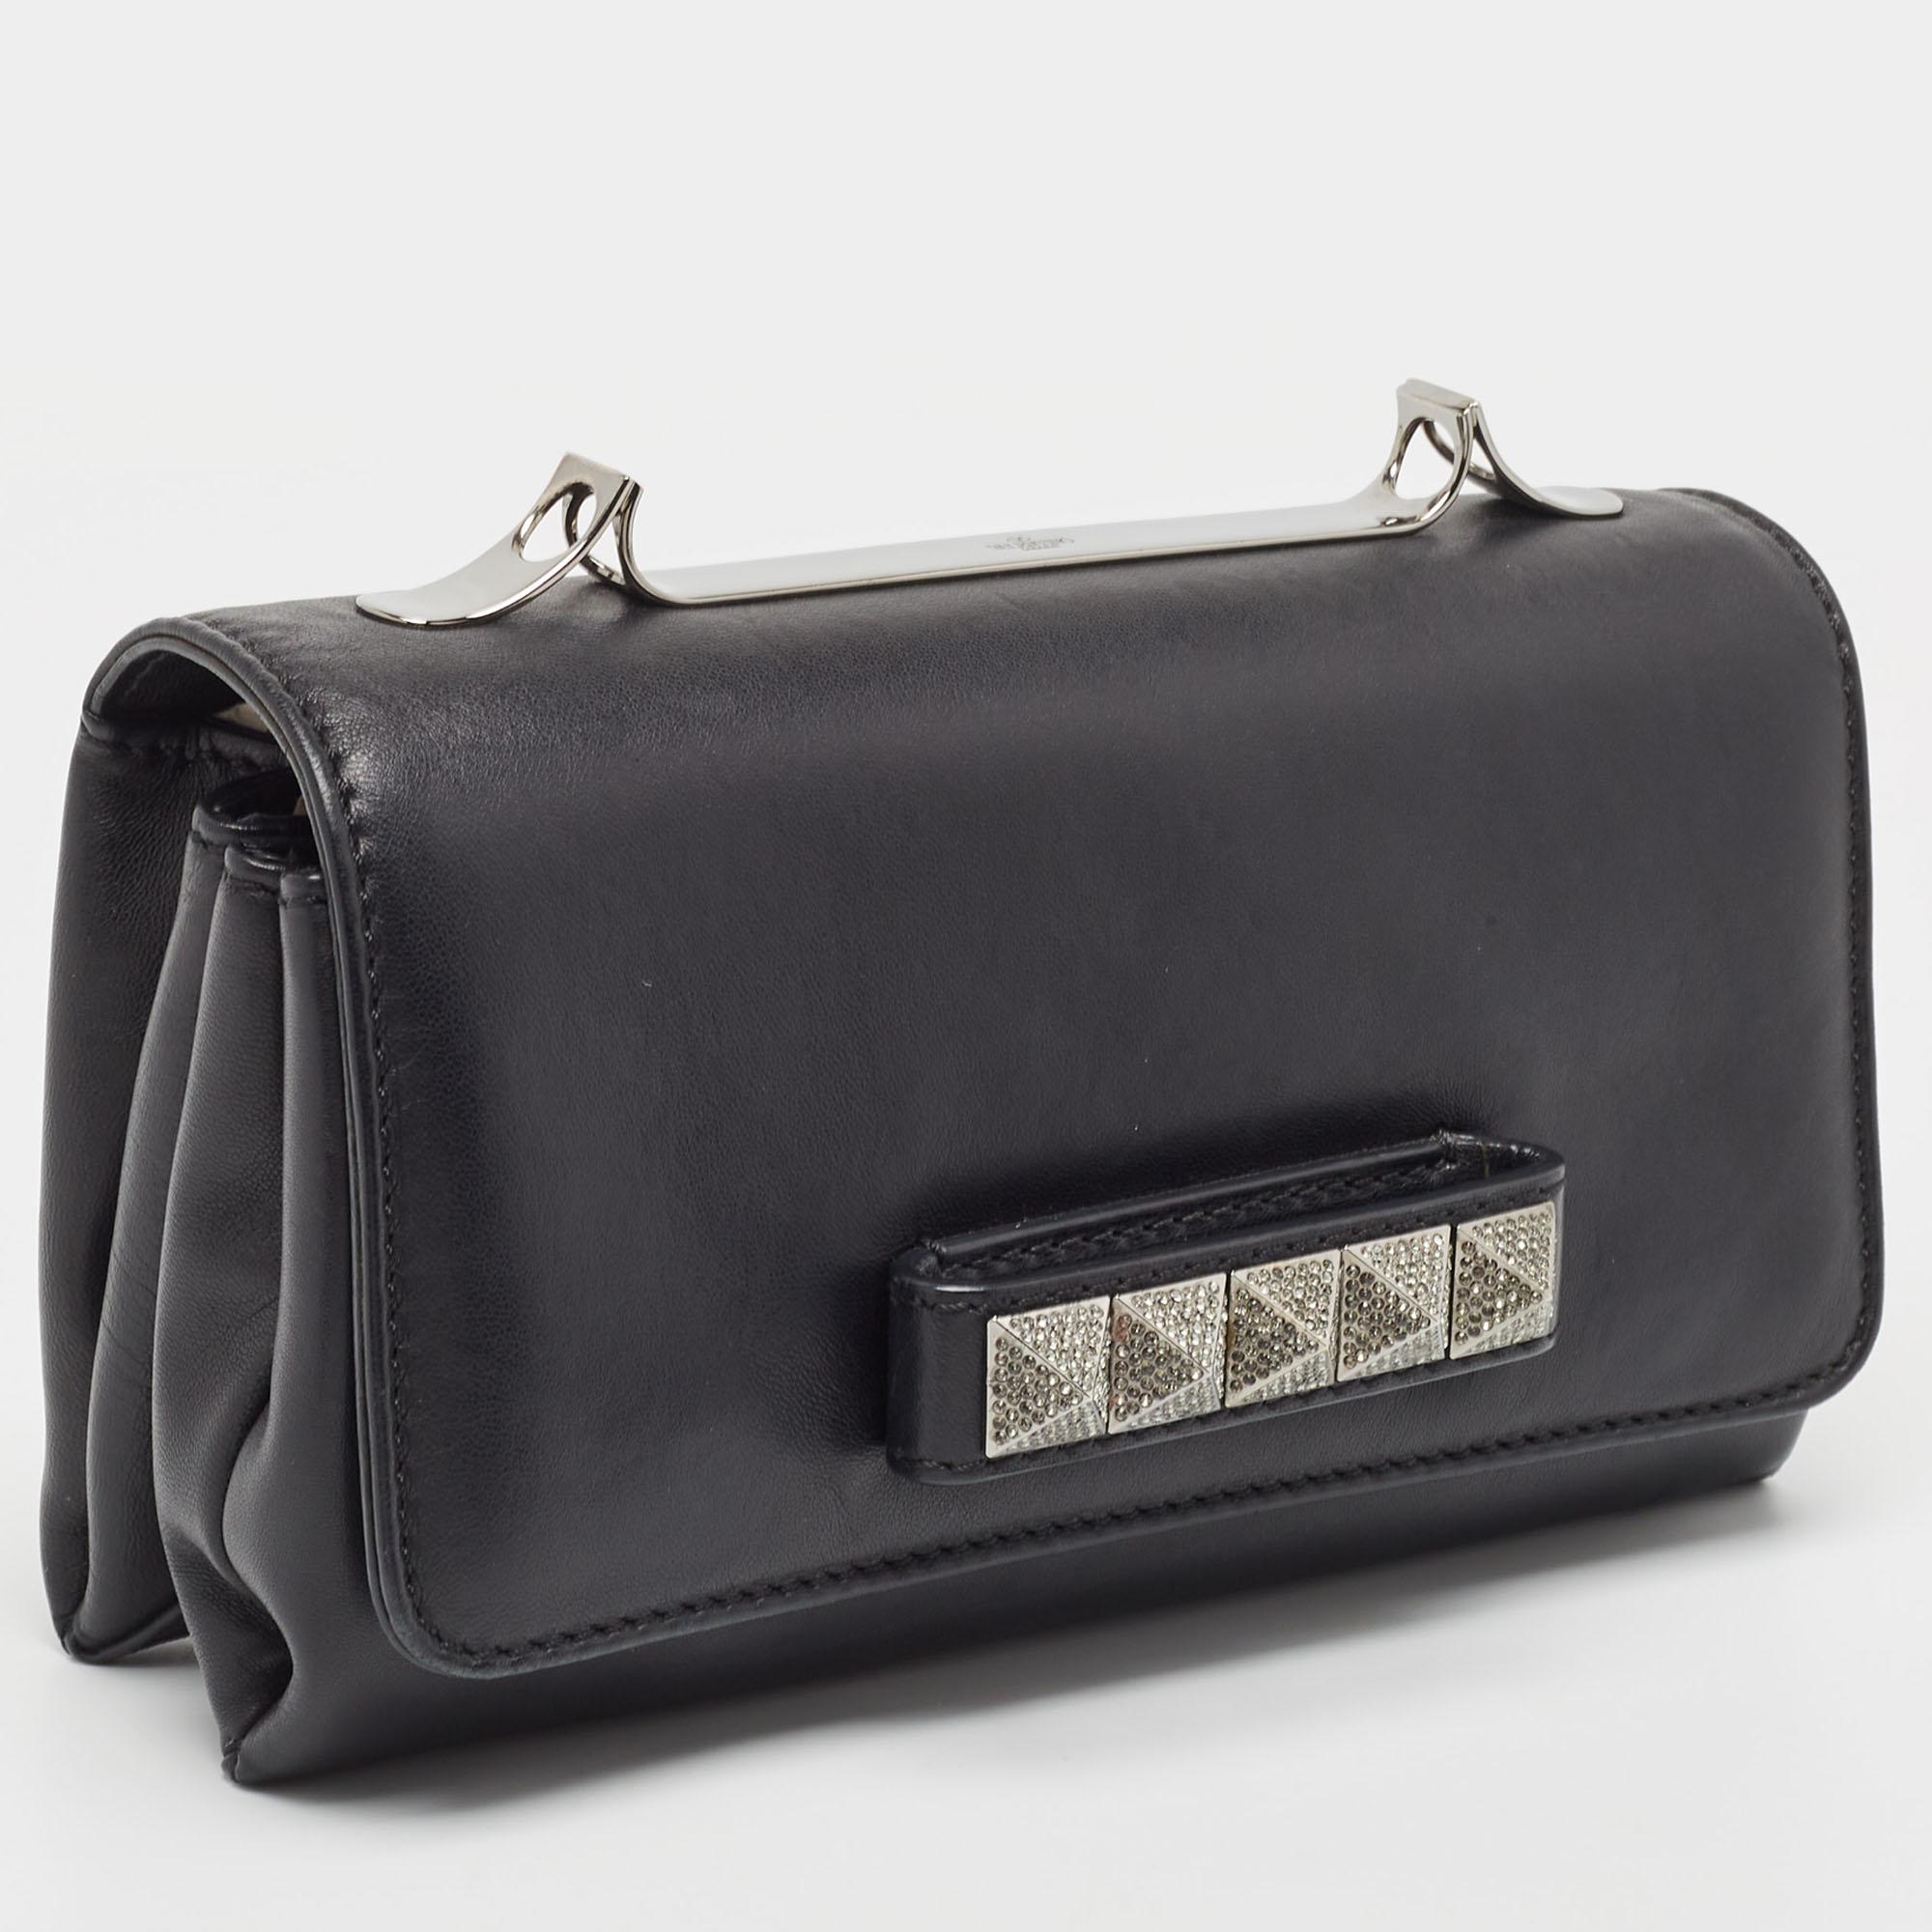 Crafted from quality materials, your wardrobe is missing out on this beautifully made designer clutch by Valentino. Look your fashionable best in any outfit with this stylish piece that promises to elevate your ensemble.

